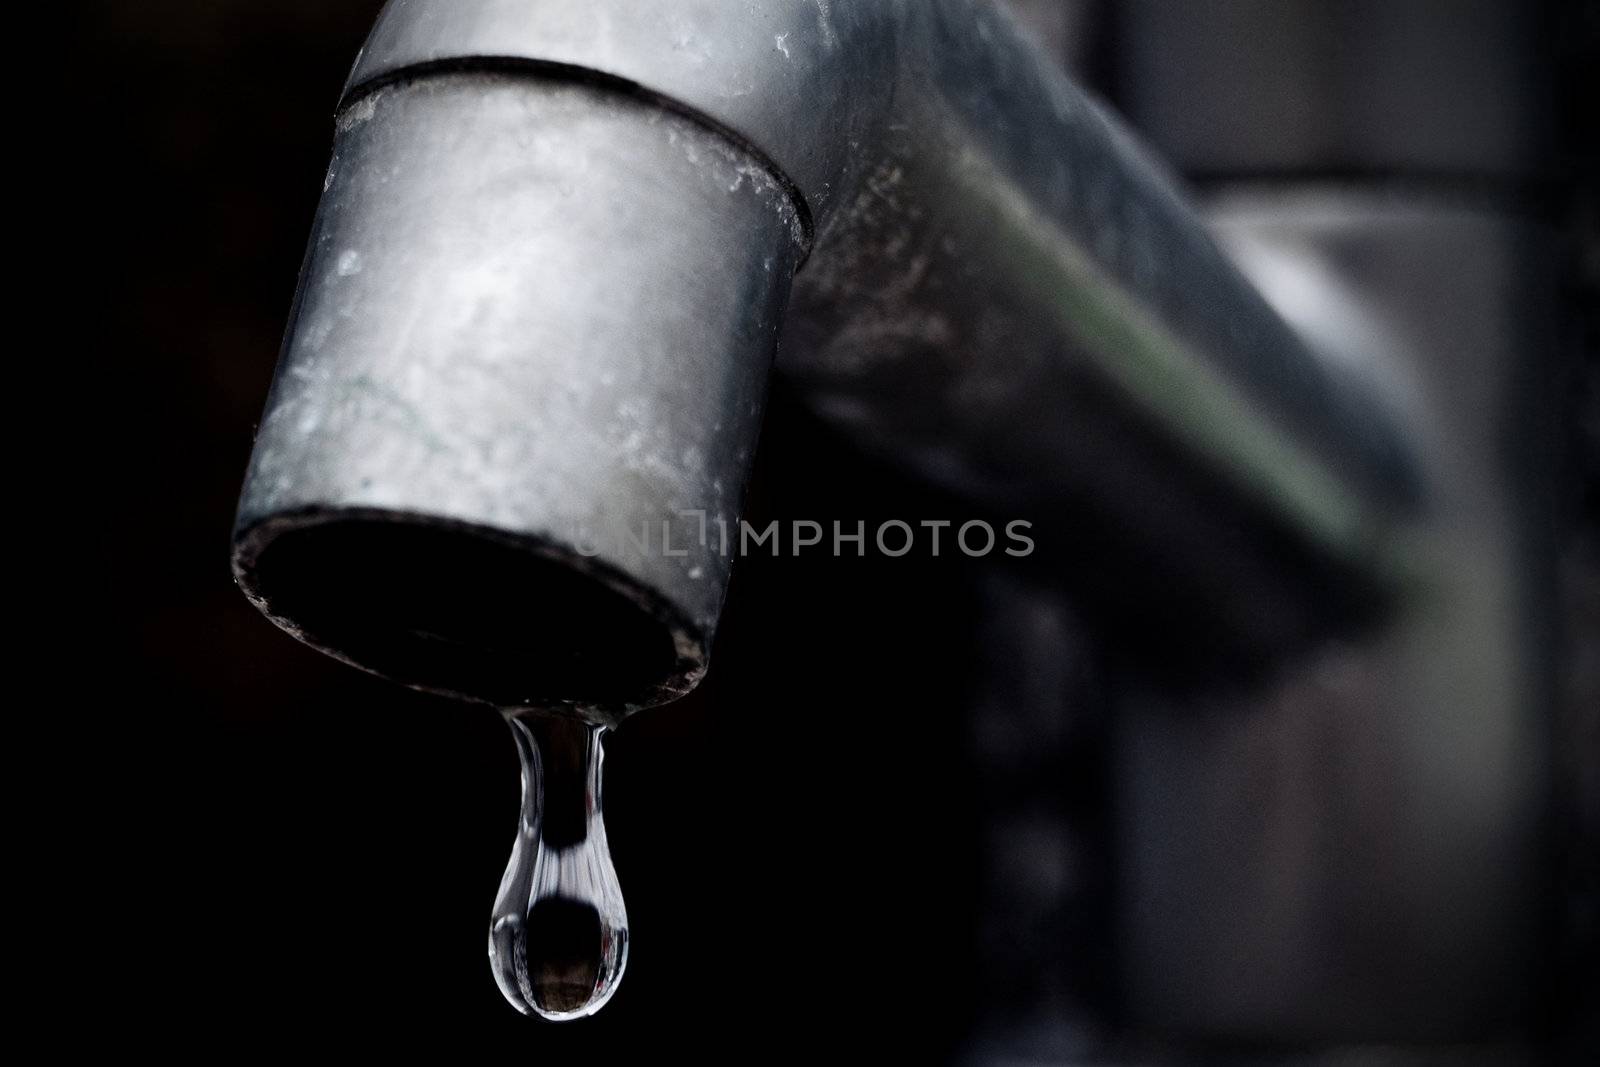 An old leaky faucet with focus on a drop of water, meaning the waste of water in the world.